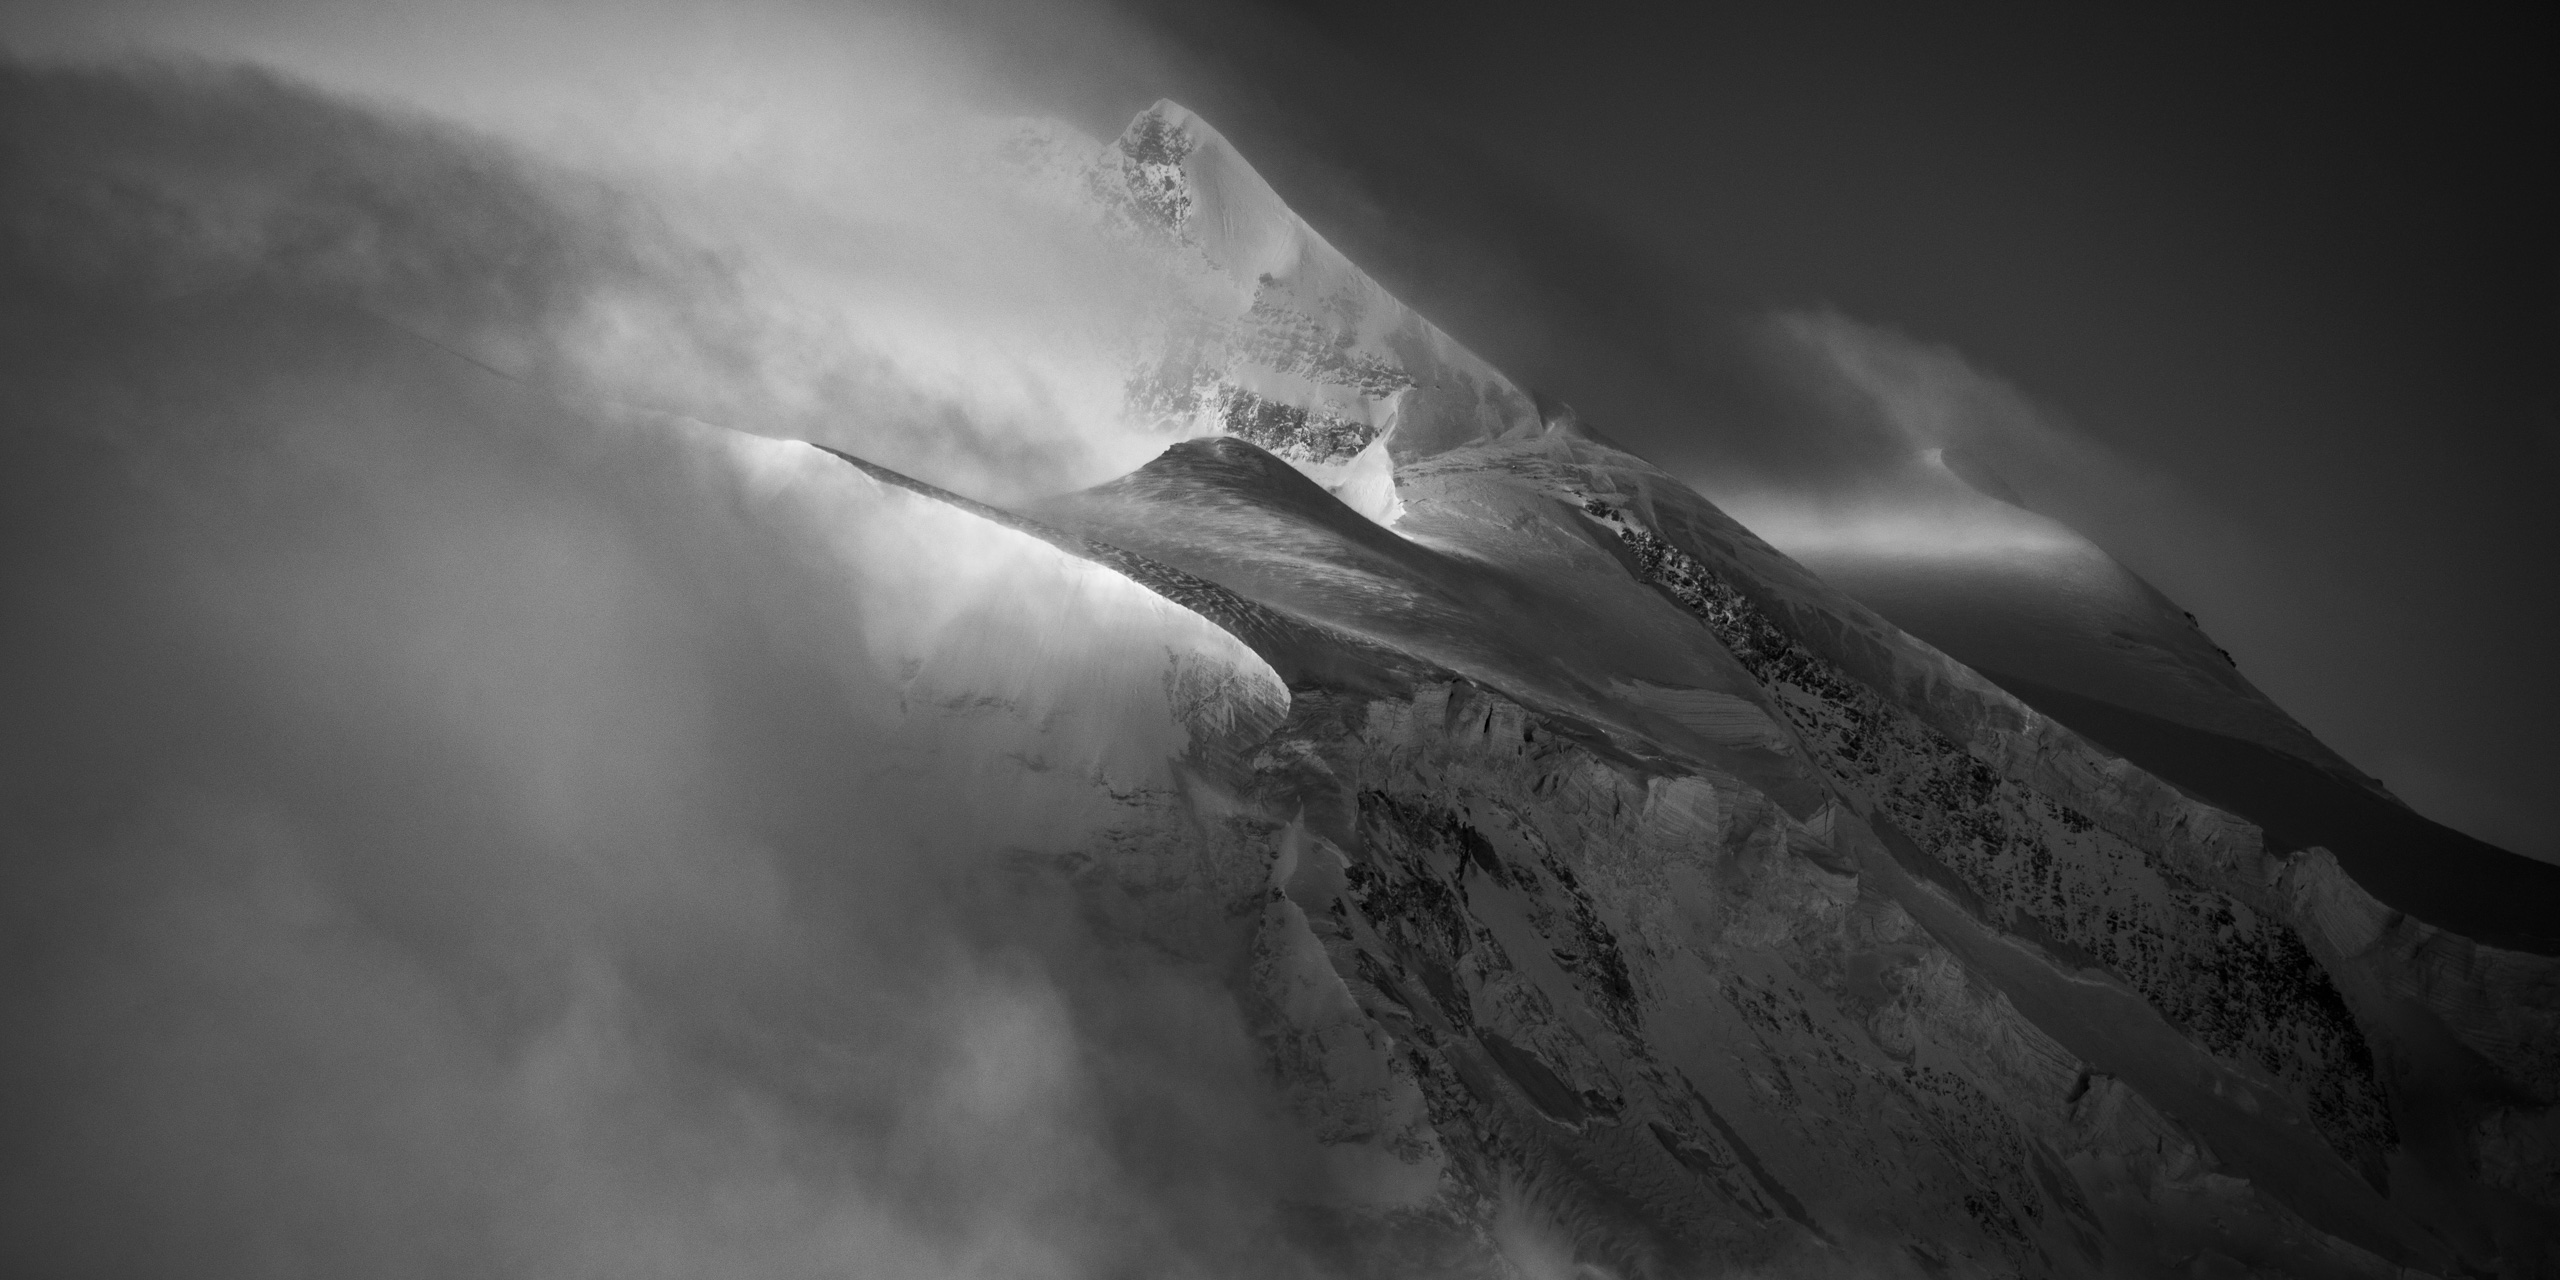 Grand combin - massif des combins in the swiss Alps - black and white photo to frame